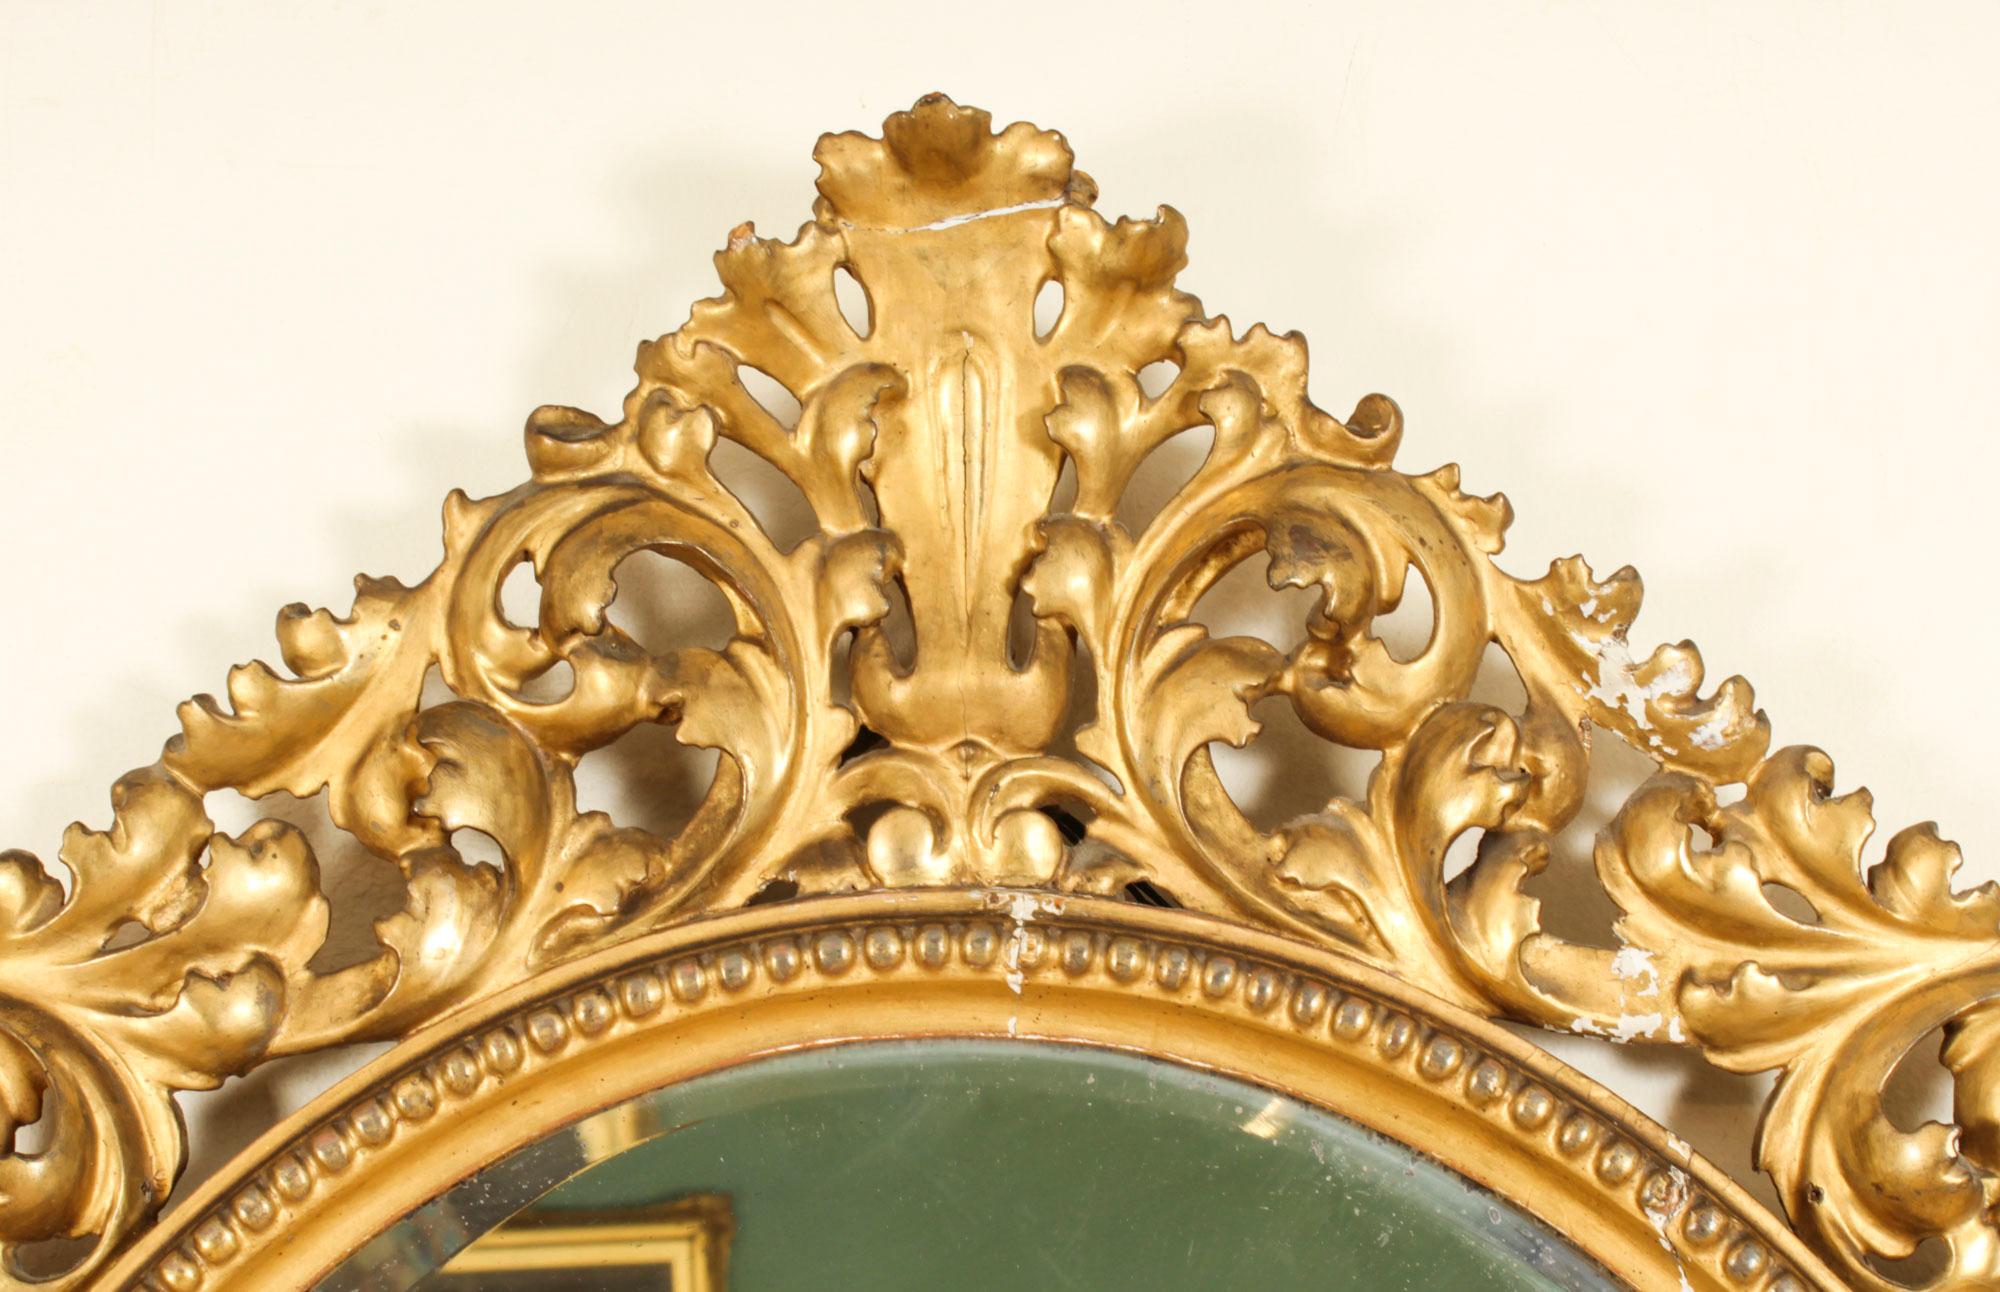 This is a fabulous large 4ft antique Italian Florentine giltwood mirror, Circa 1880 in date.

The oval mirror consists of a superbly carved cresting to the top and bottom, the frieze is decorated with  hand carved floral and foliate motifs with